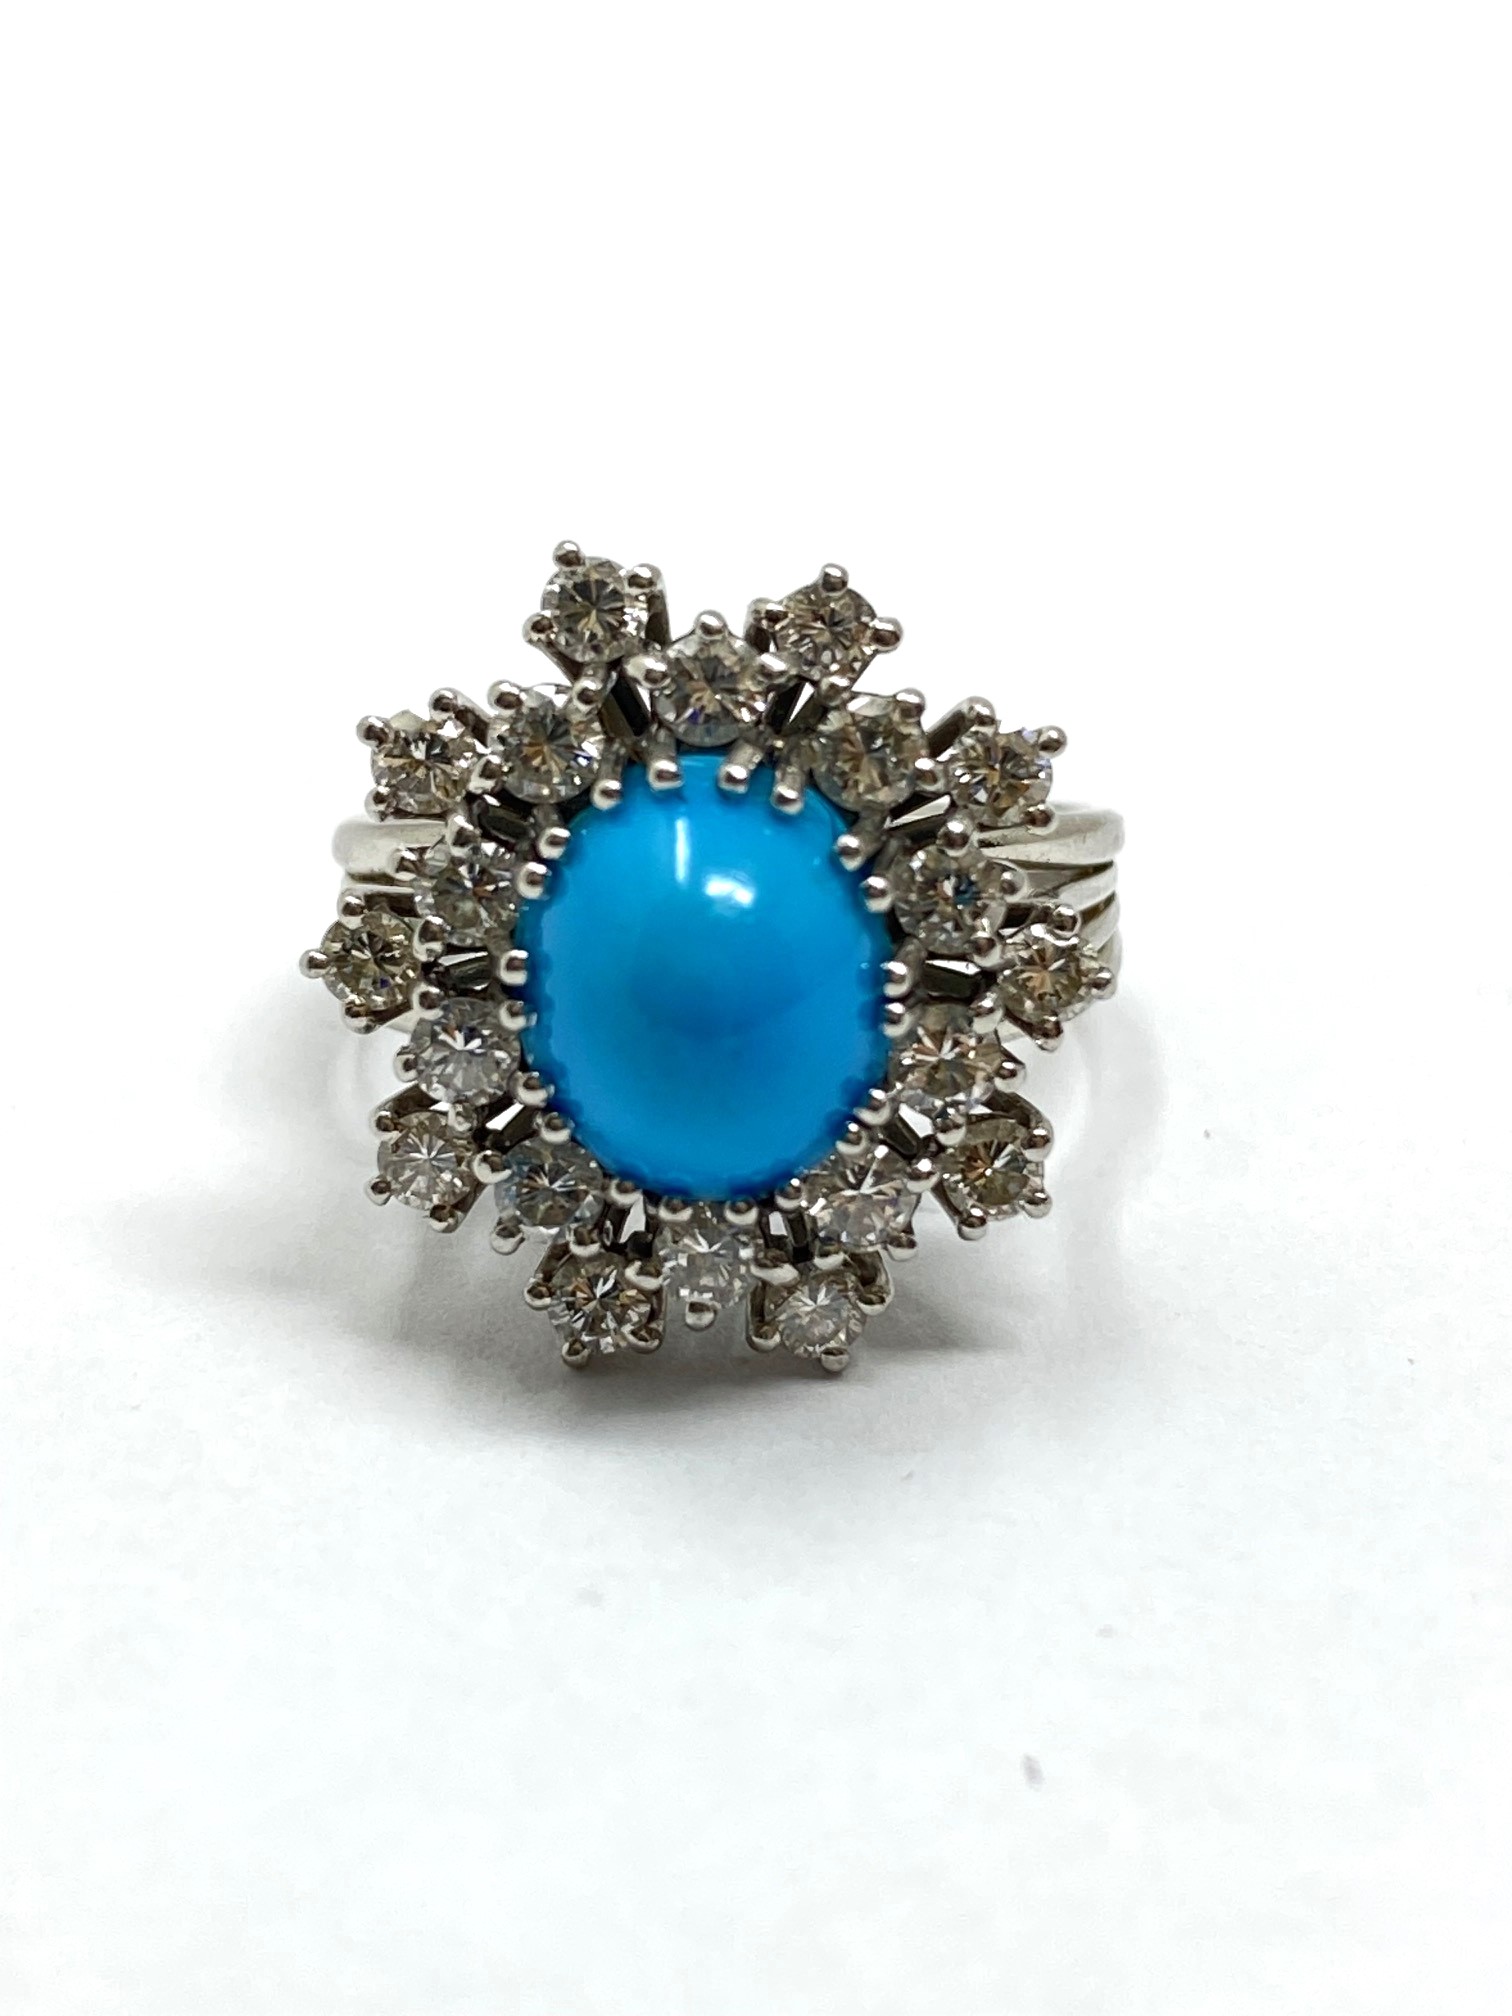 TURQUOISE AND DIAMOND RING, 1960s - Image 6 of 7